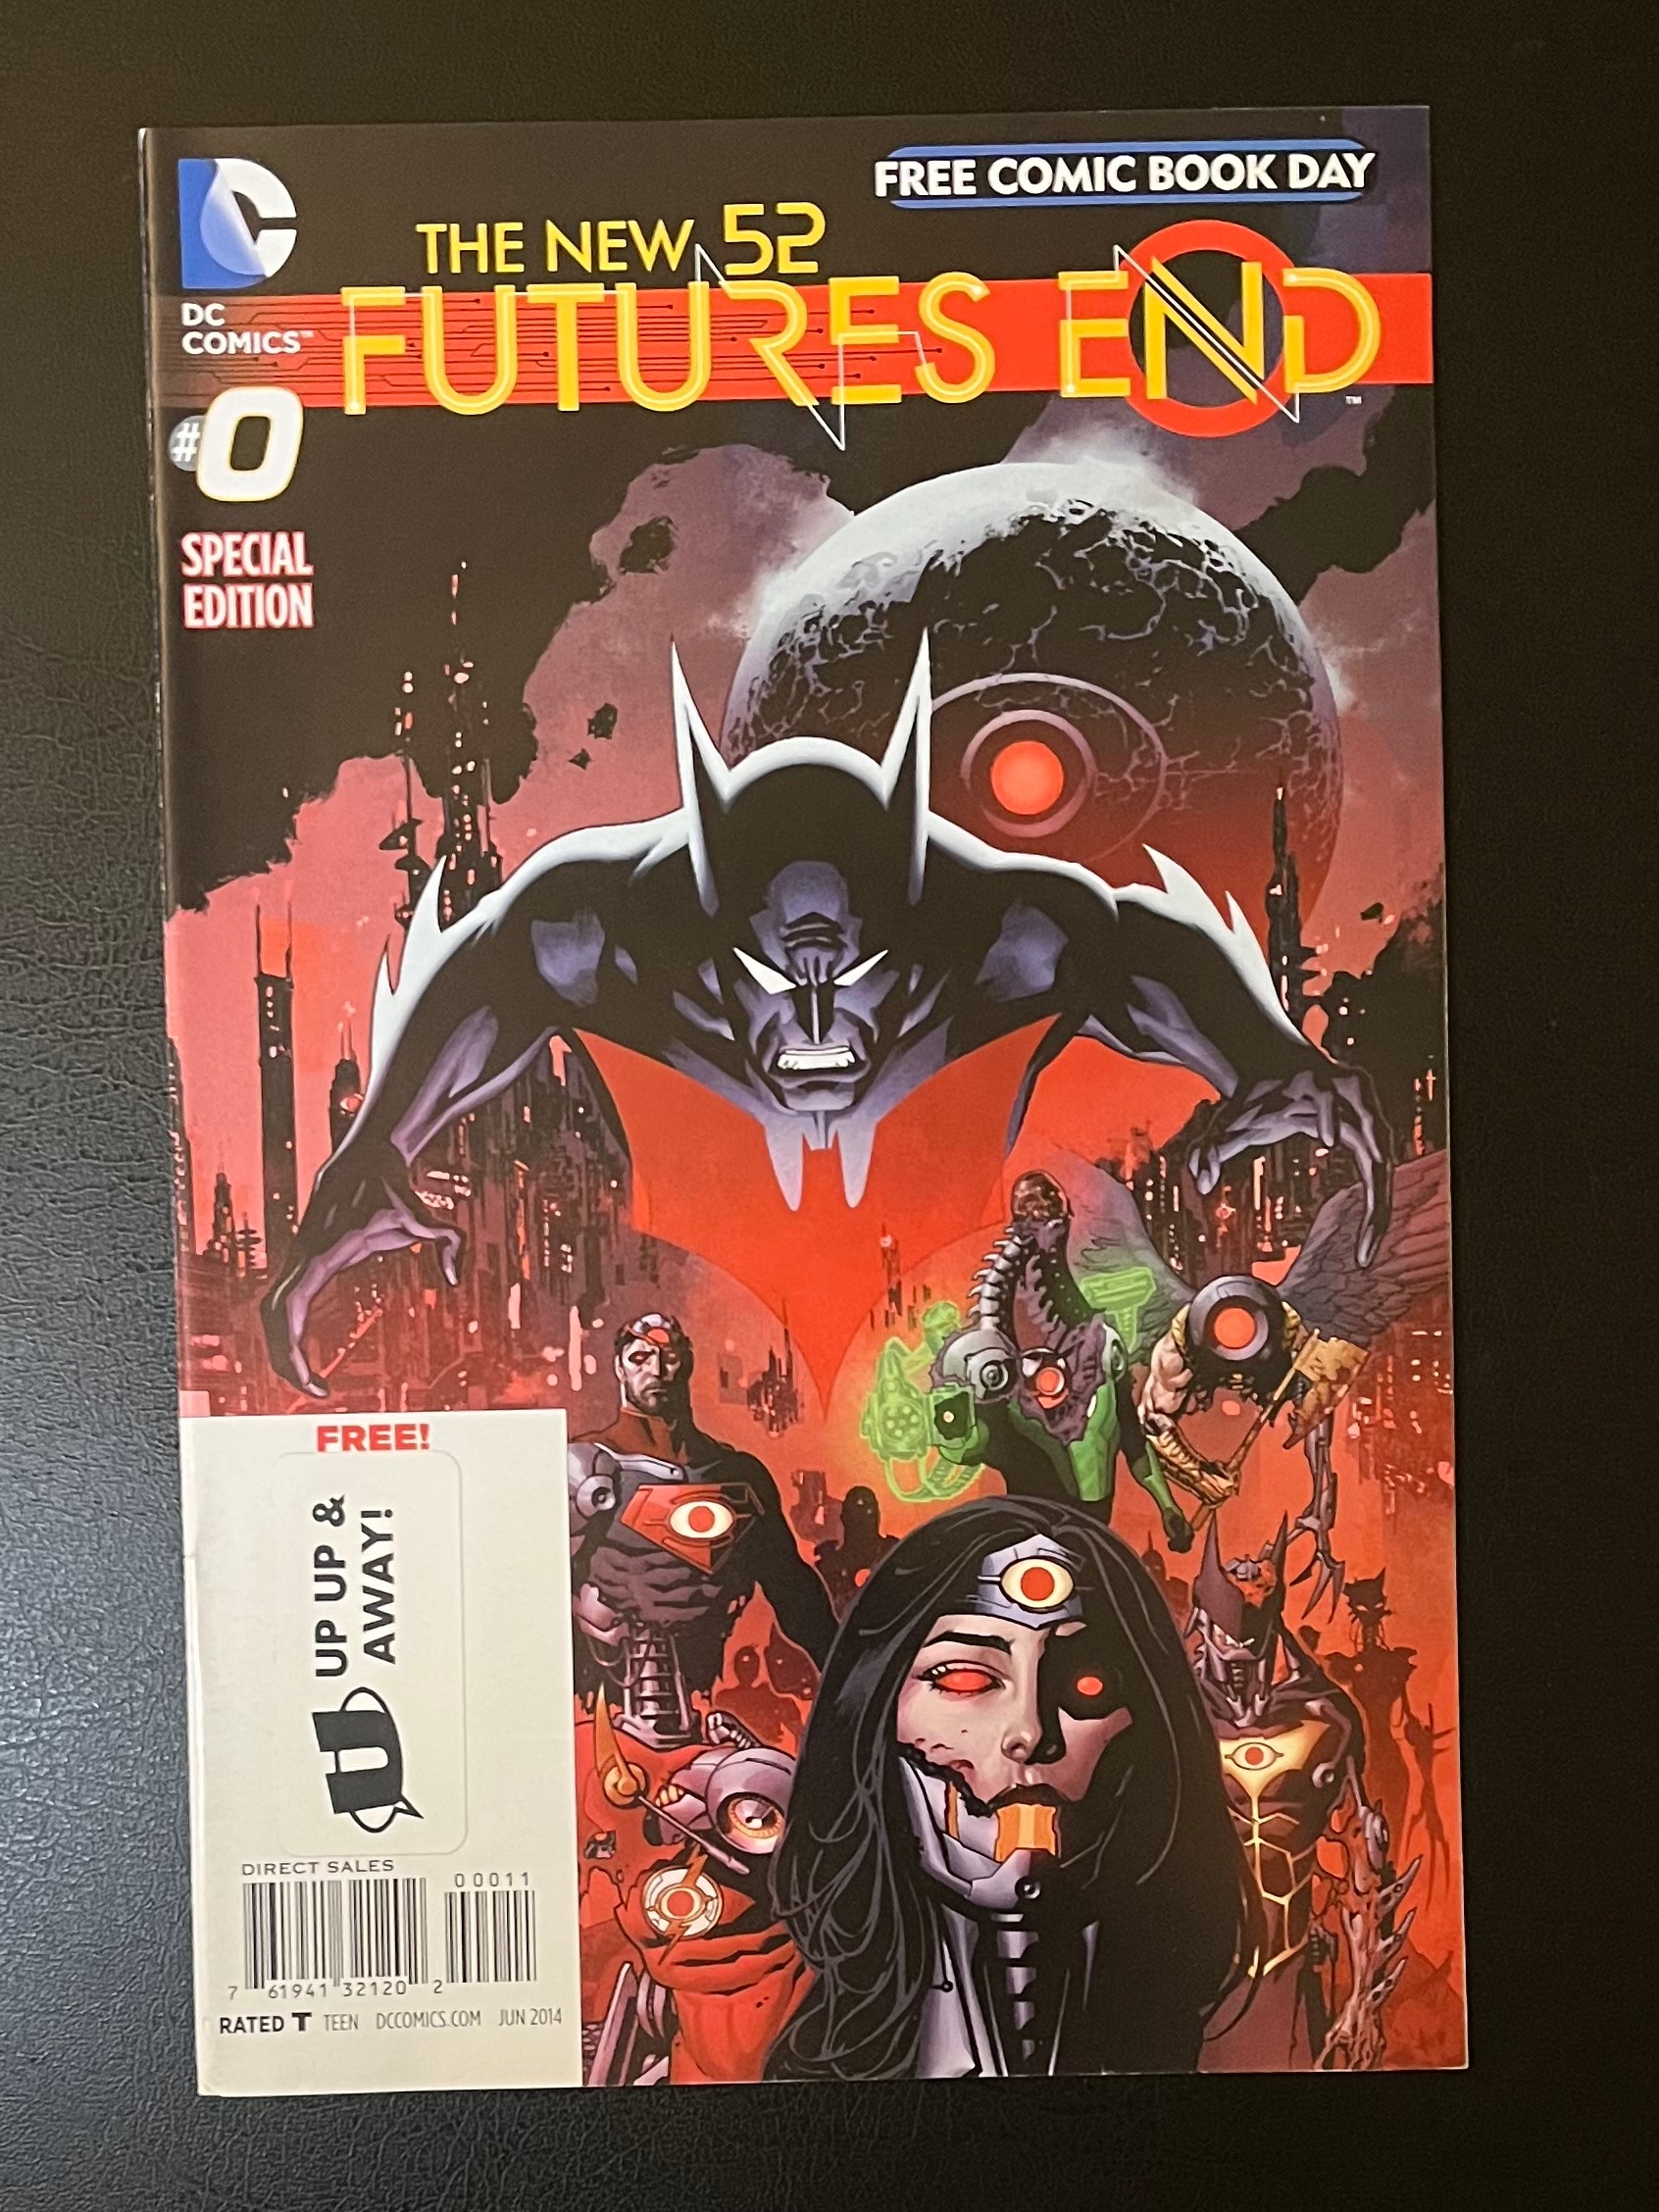 The New 52: Futures End #0